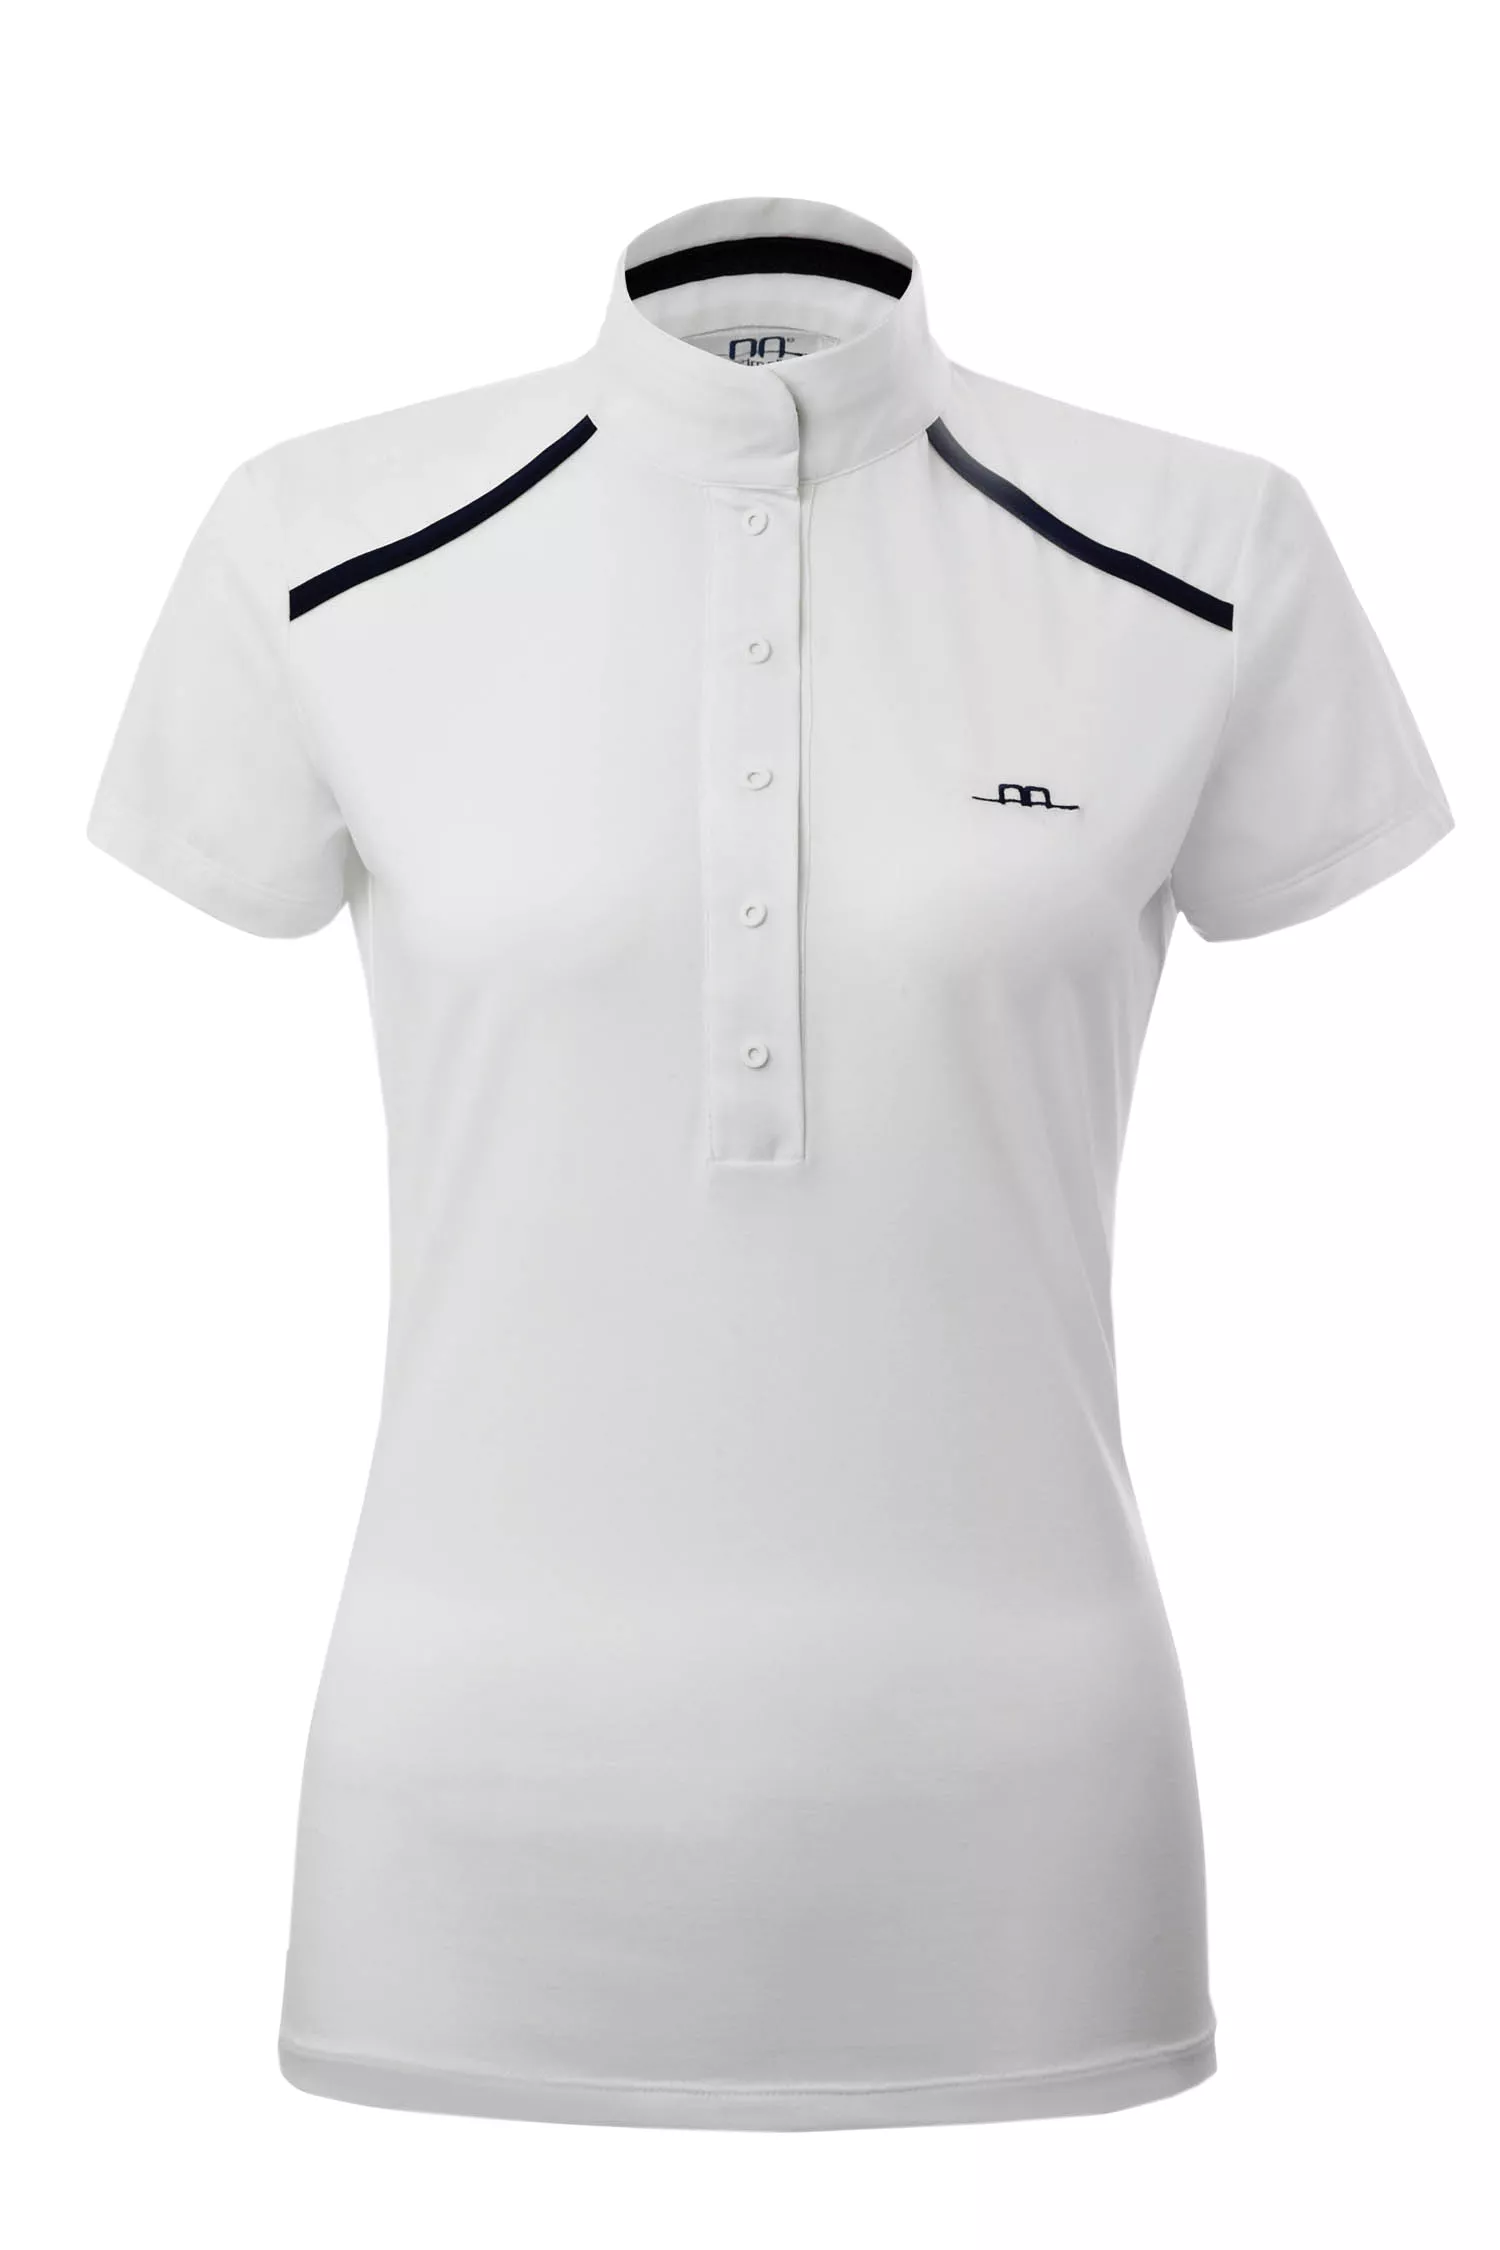 Albanese - Ladies' competition shirt "Rio", white/navy